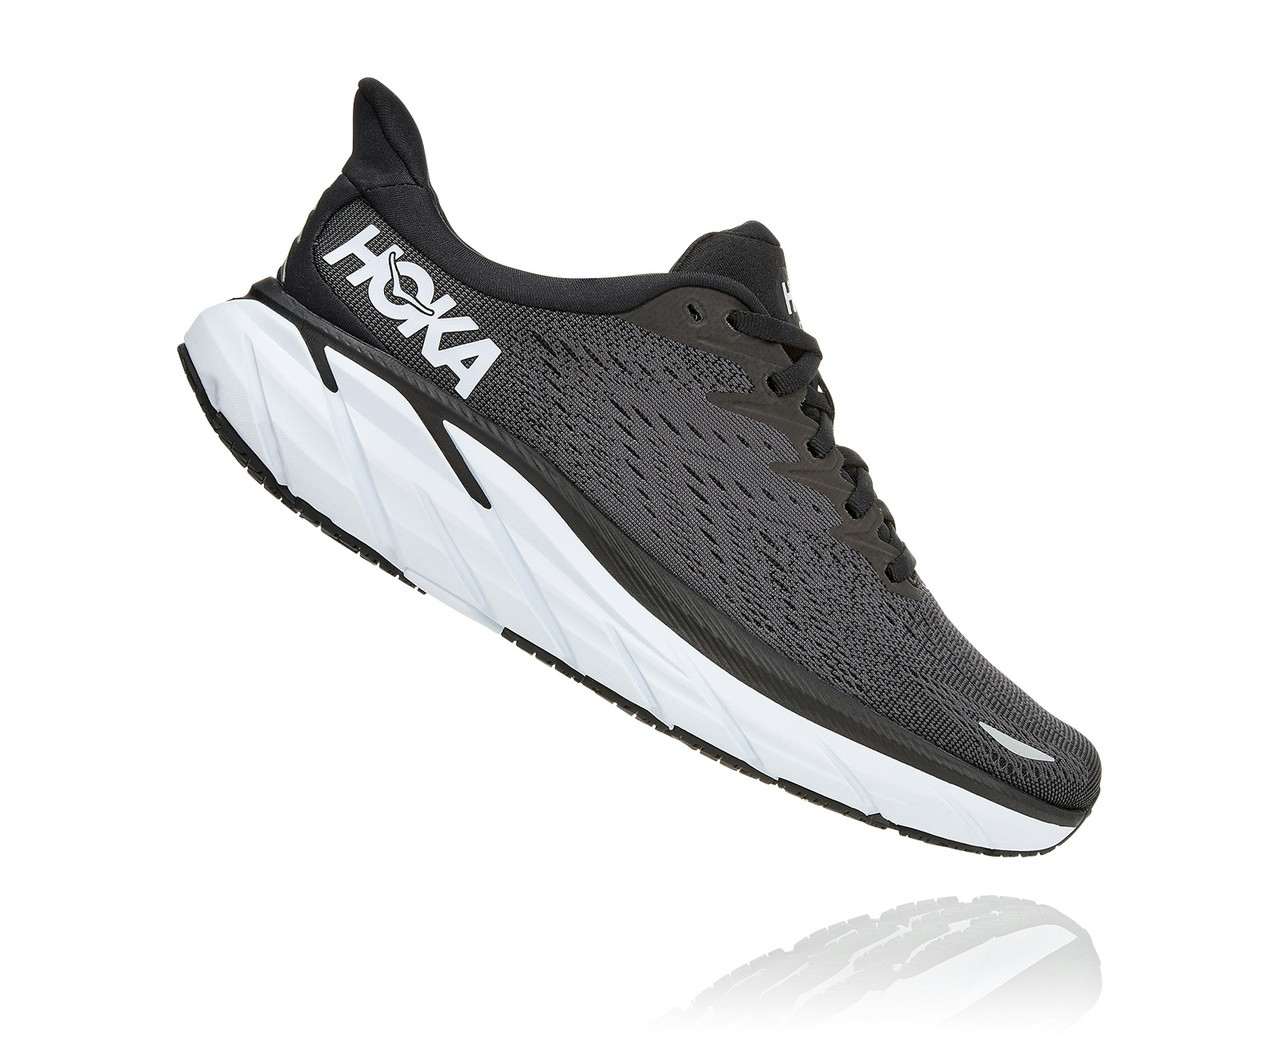 Clifton 8 Road Running Shoes Black/White